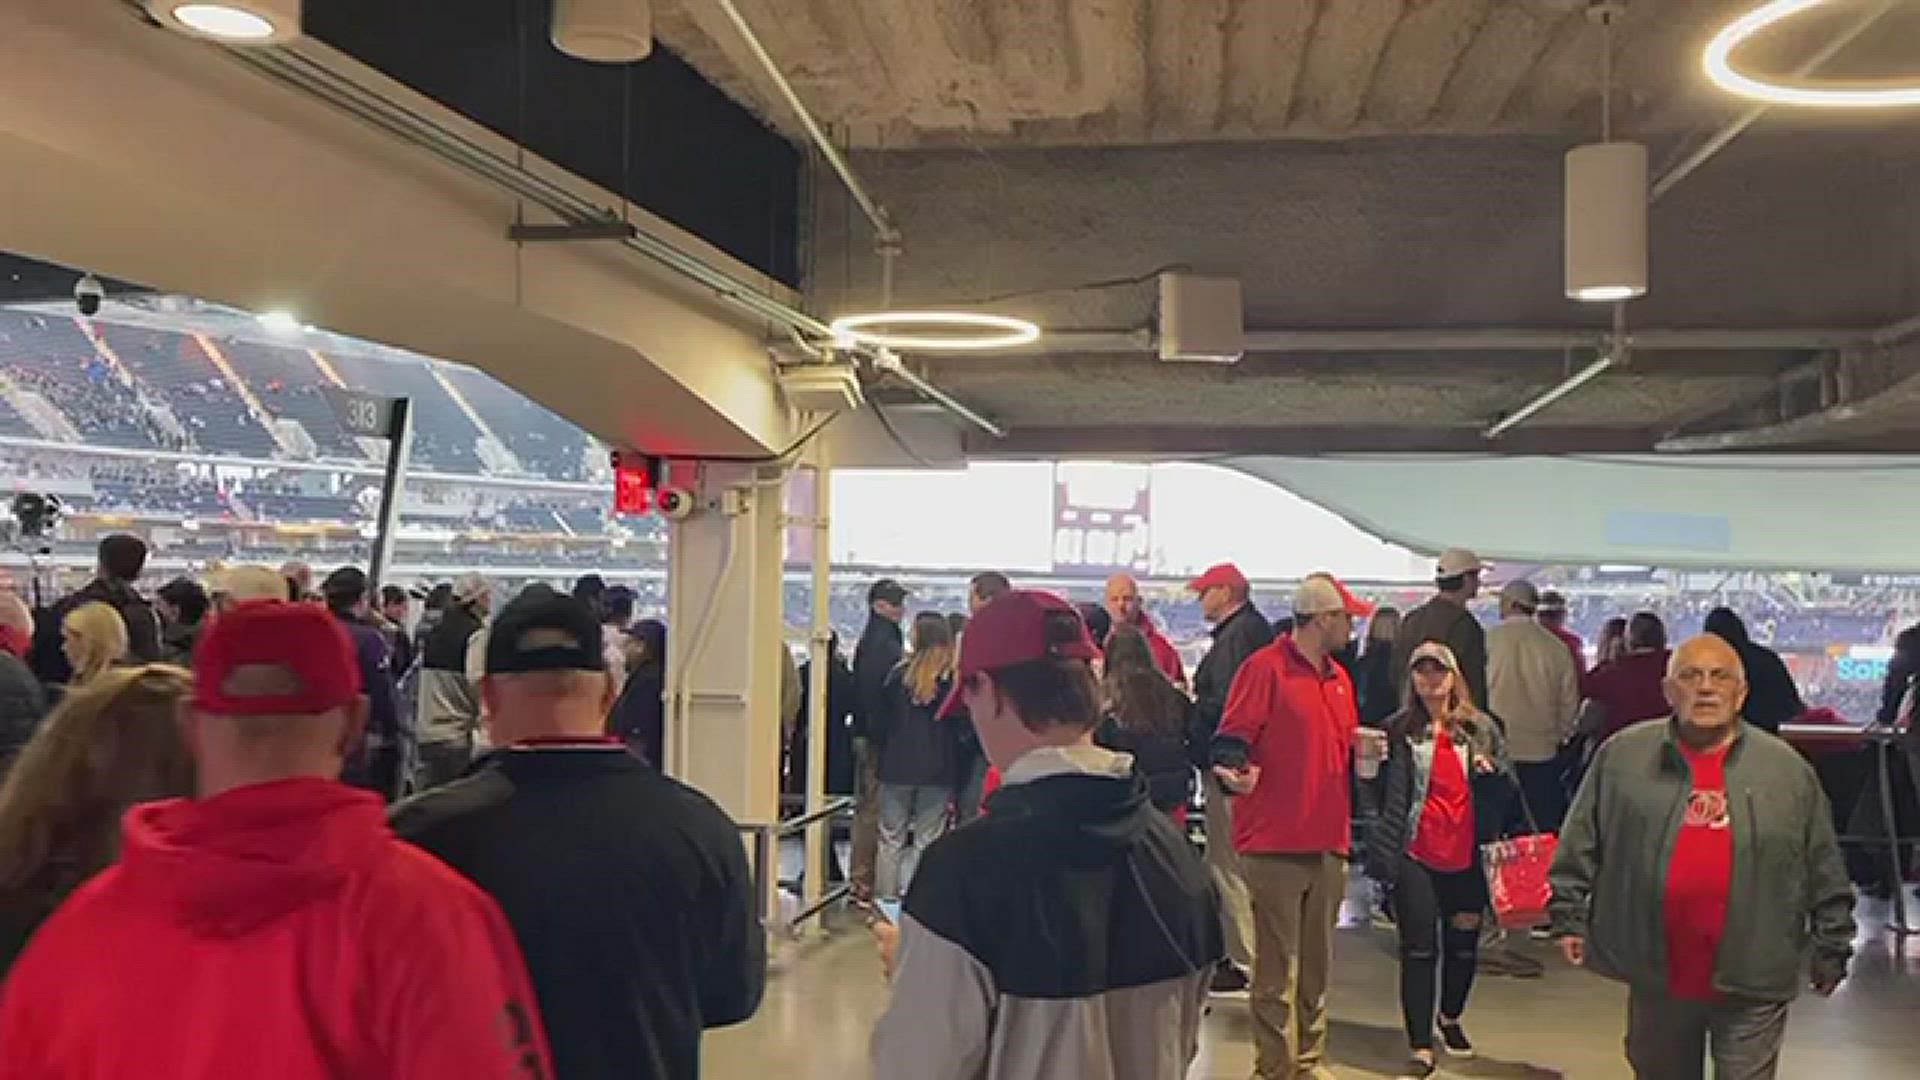 TCU and Georgia kick off from SoFi Stadium for the CFP National Championship. Here's a look inside from WFAA's Ryan Osborne.